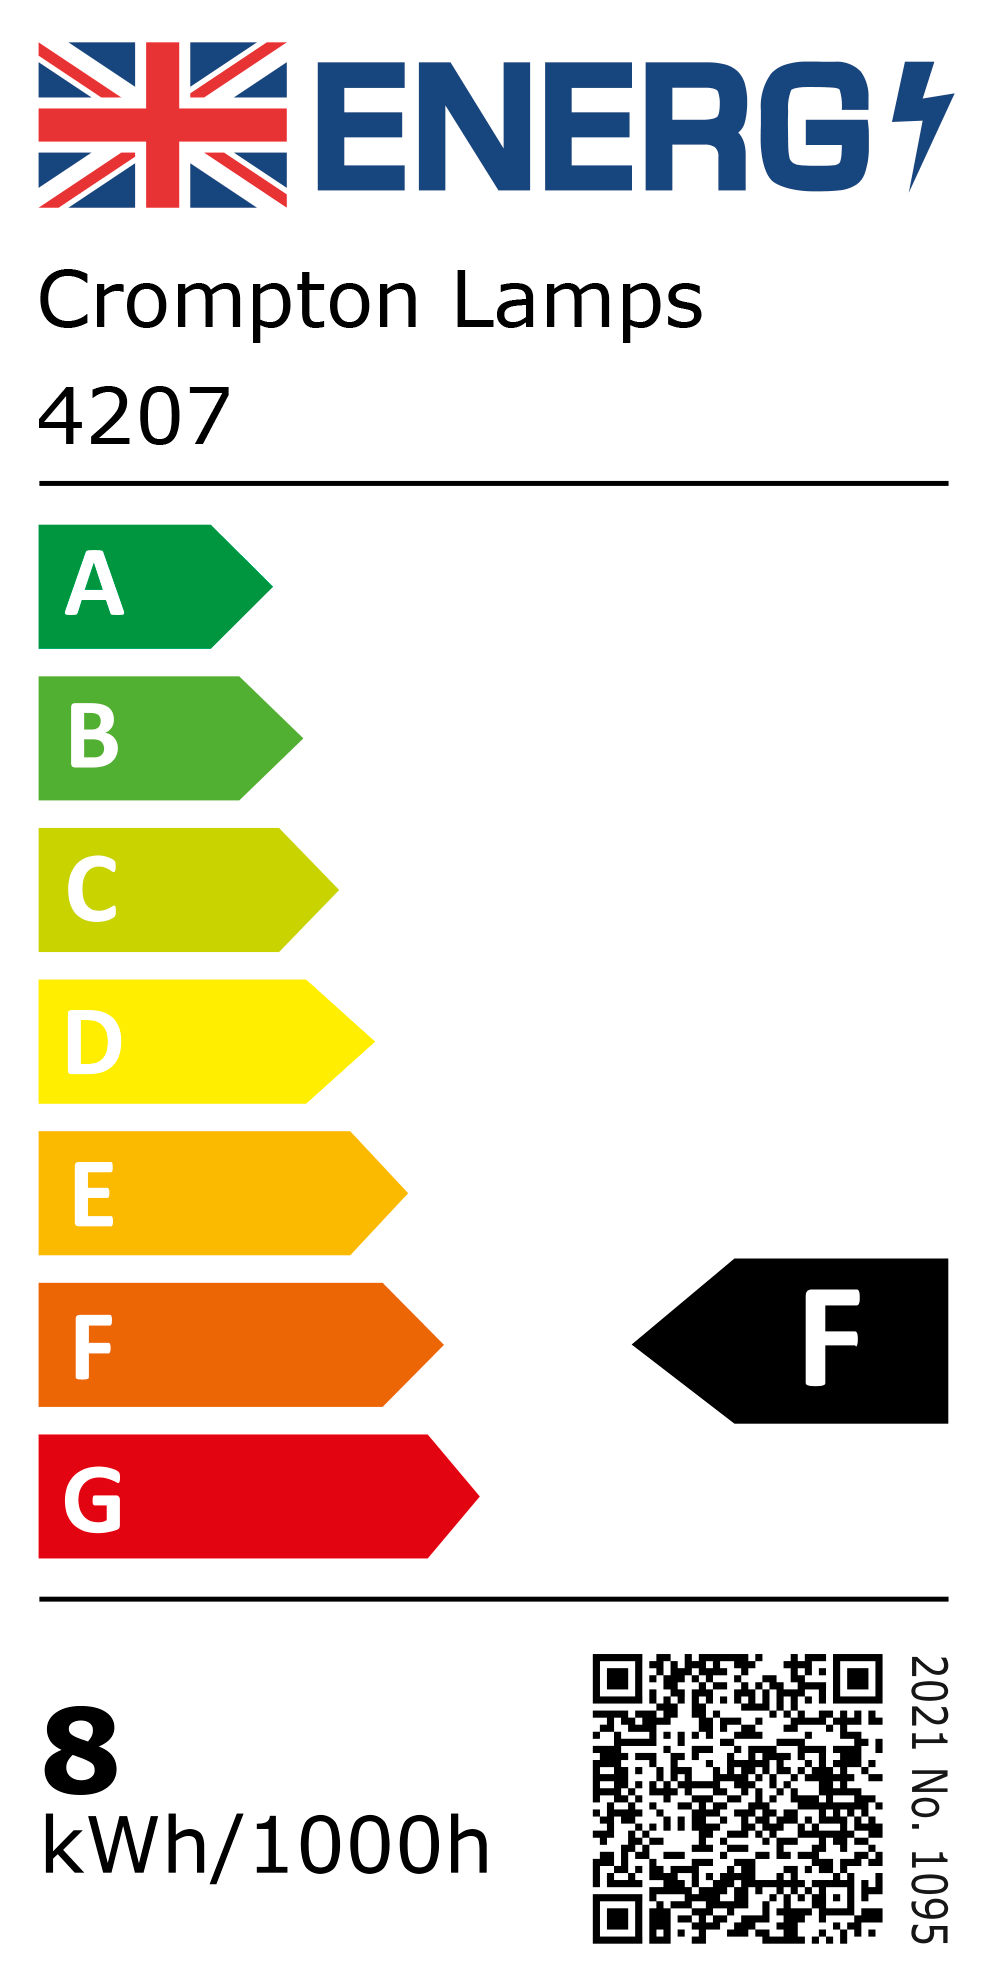 New 2021 Energy Rating Label: Stock Code 4207